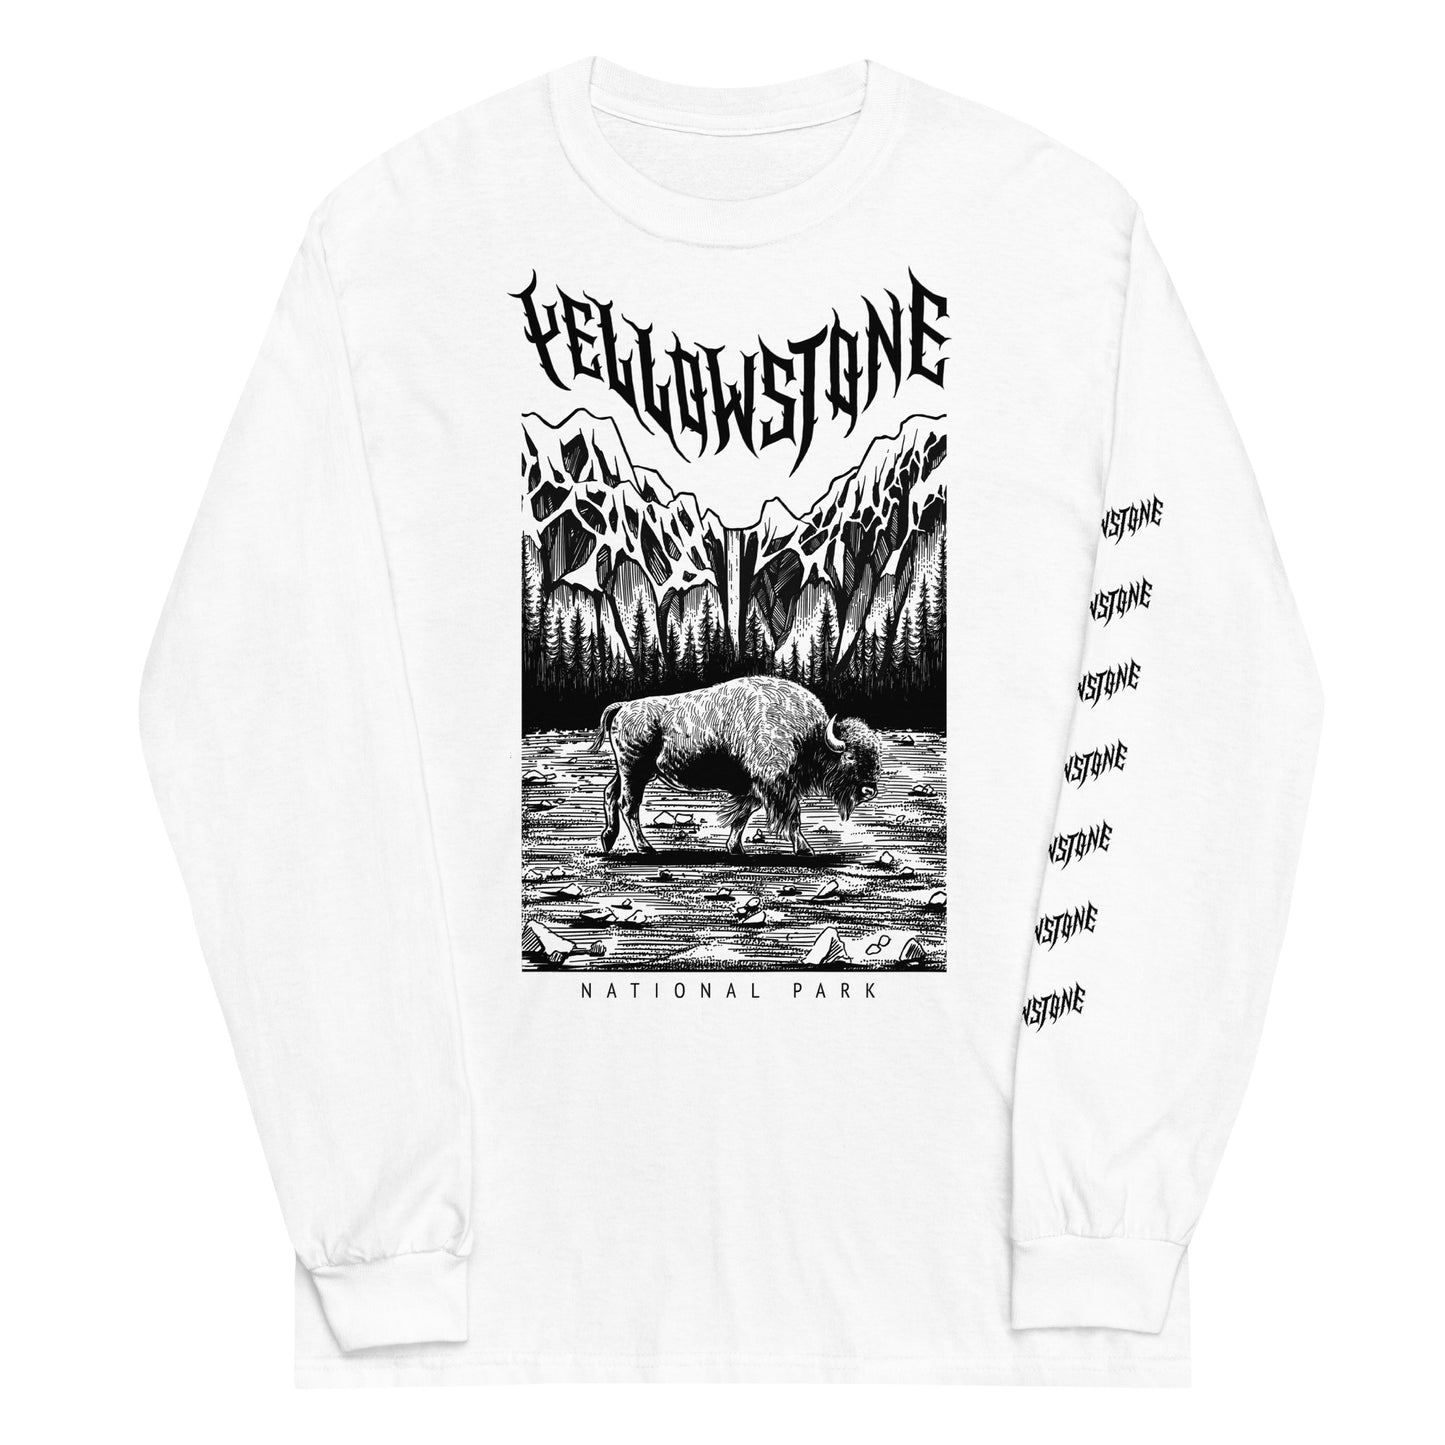 Yellowstone National Park White Long Sleeve Death Metal T-Shirt